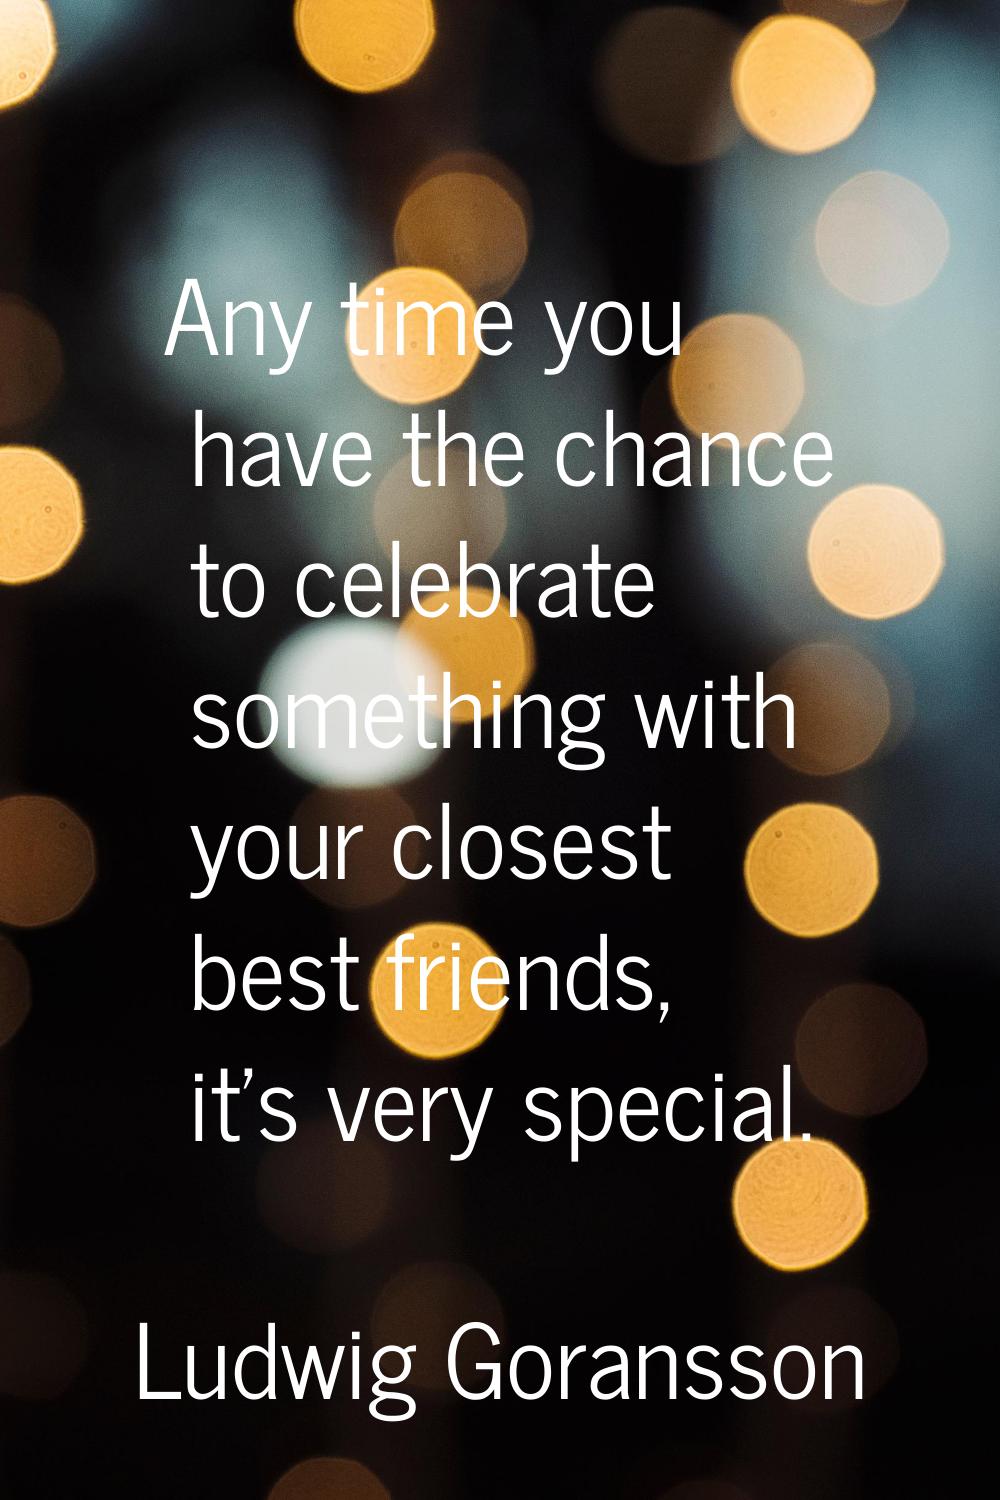 Any time you have the chance to celebrate something with your closest best friends, it's very speci